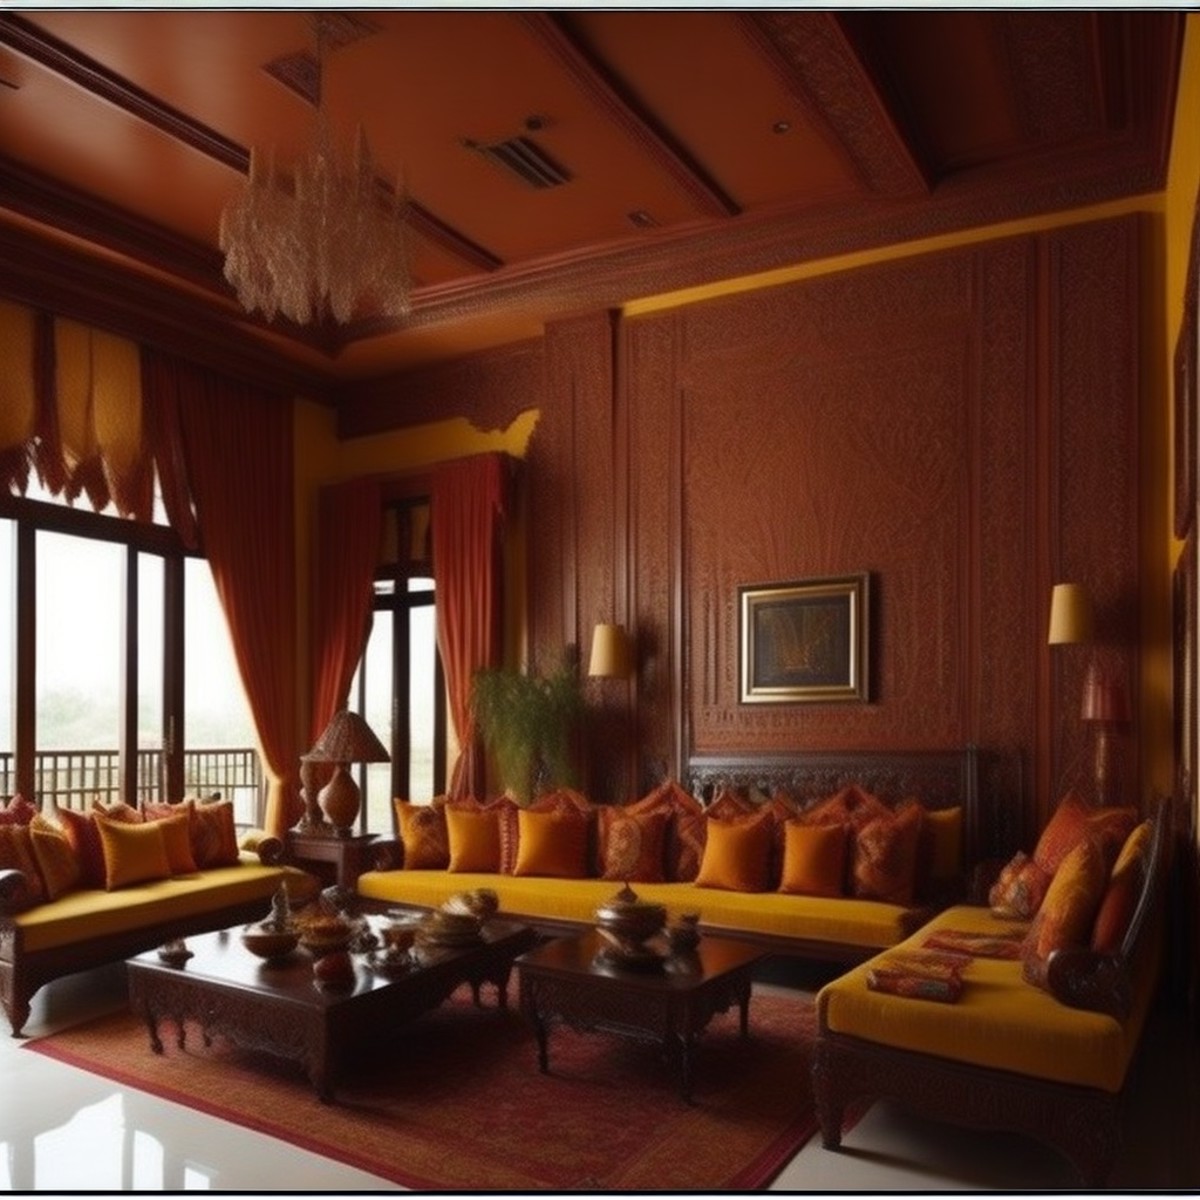 02109-1268209389-Indian style interior design of living room.png